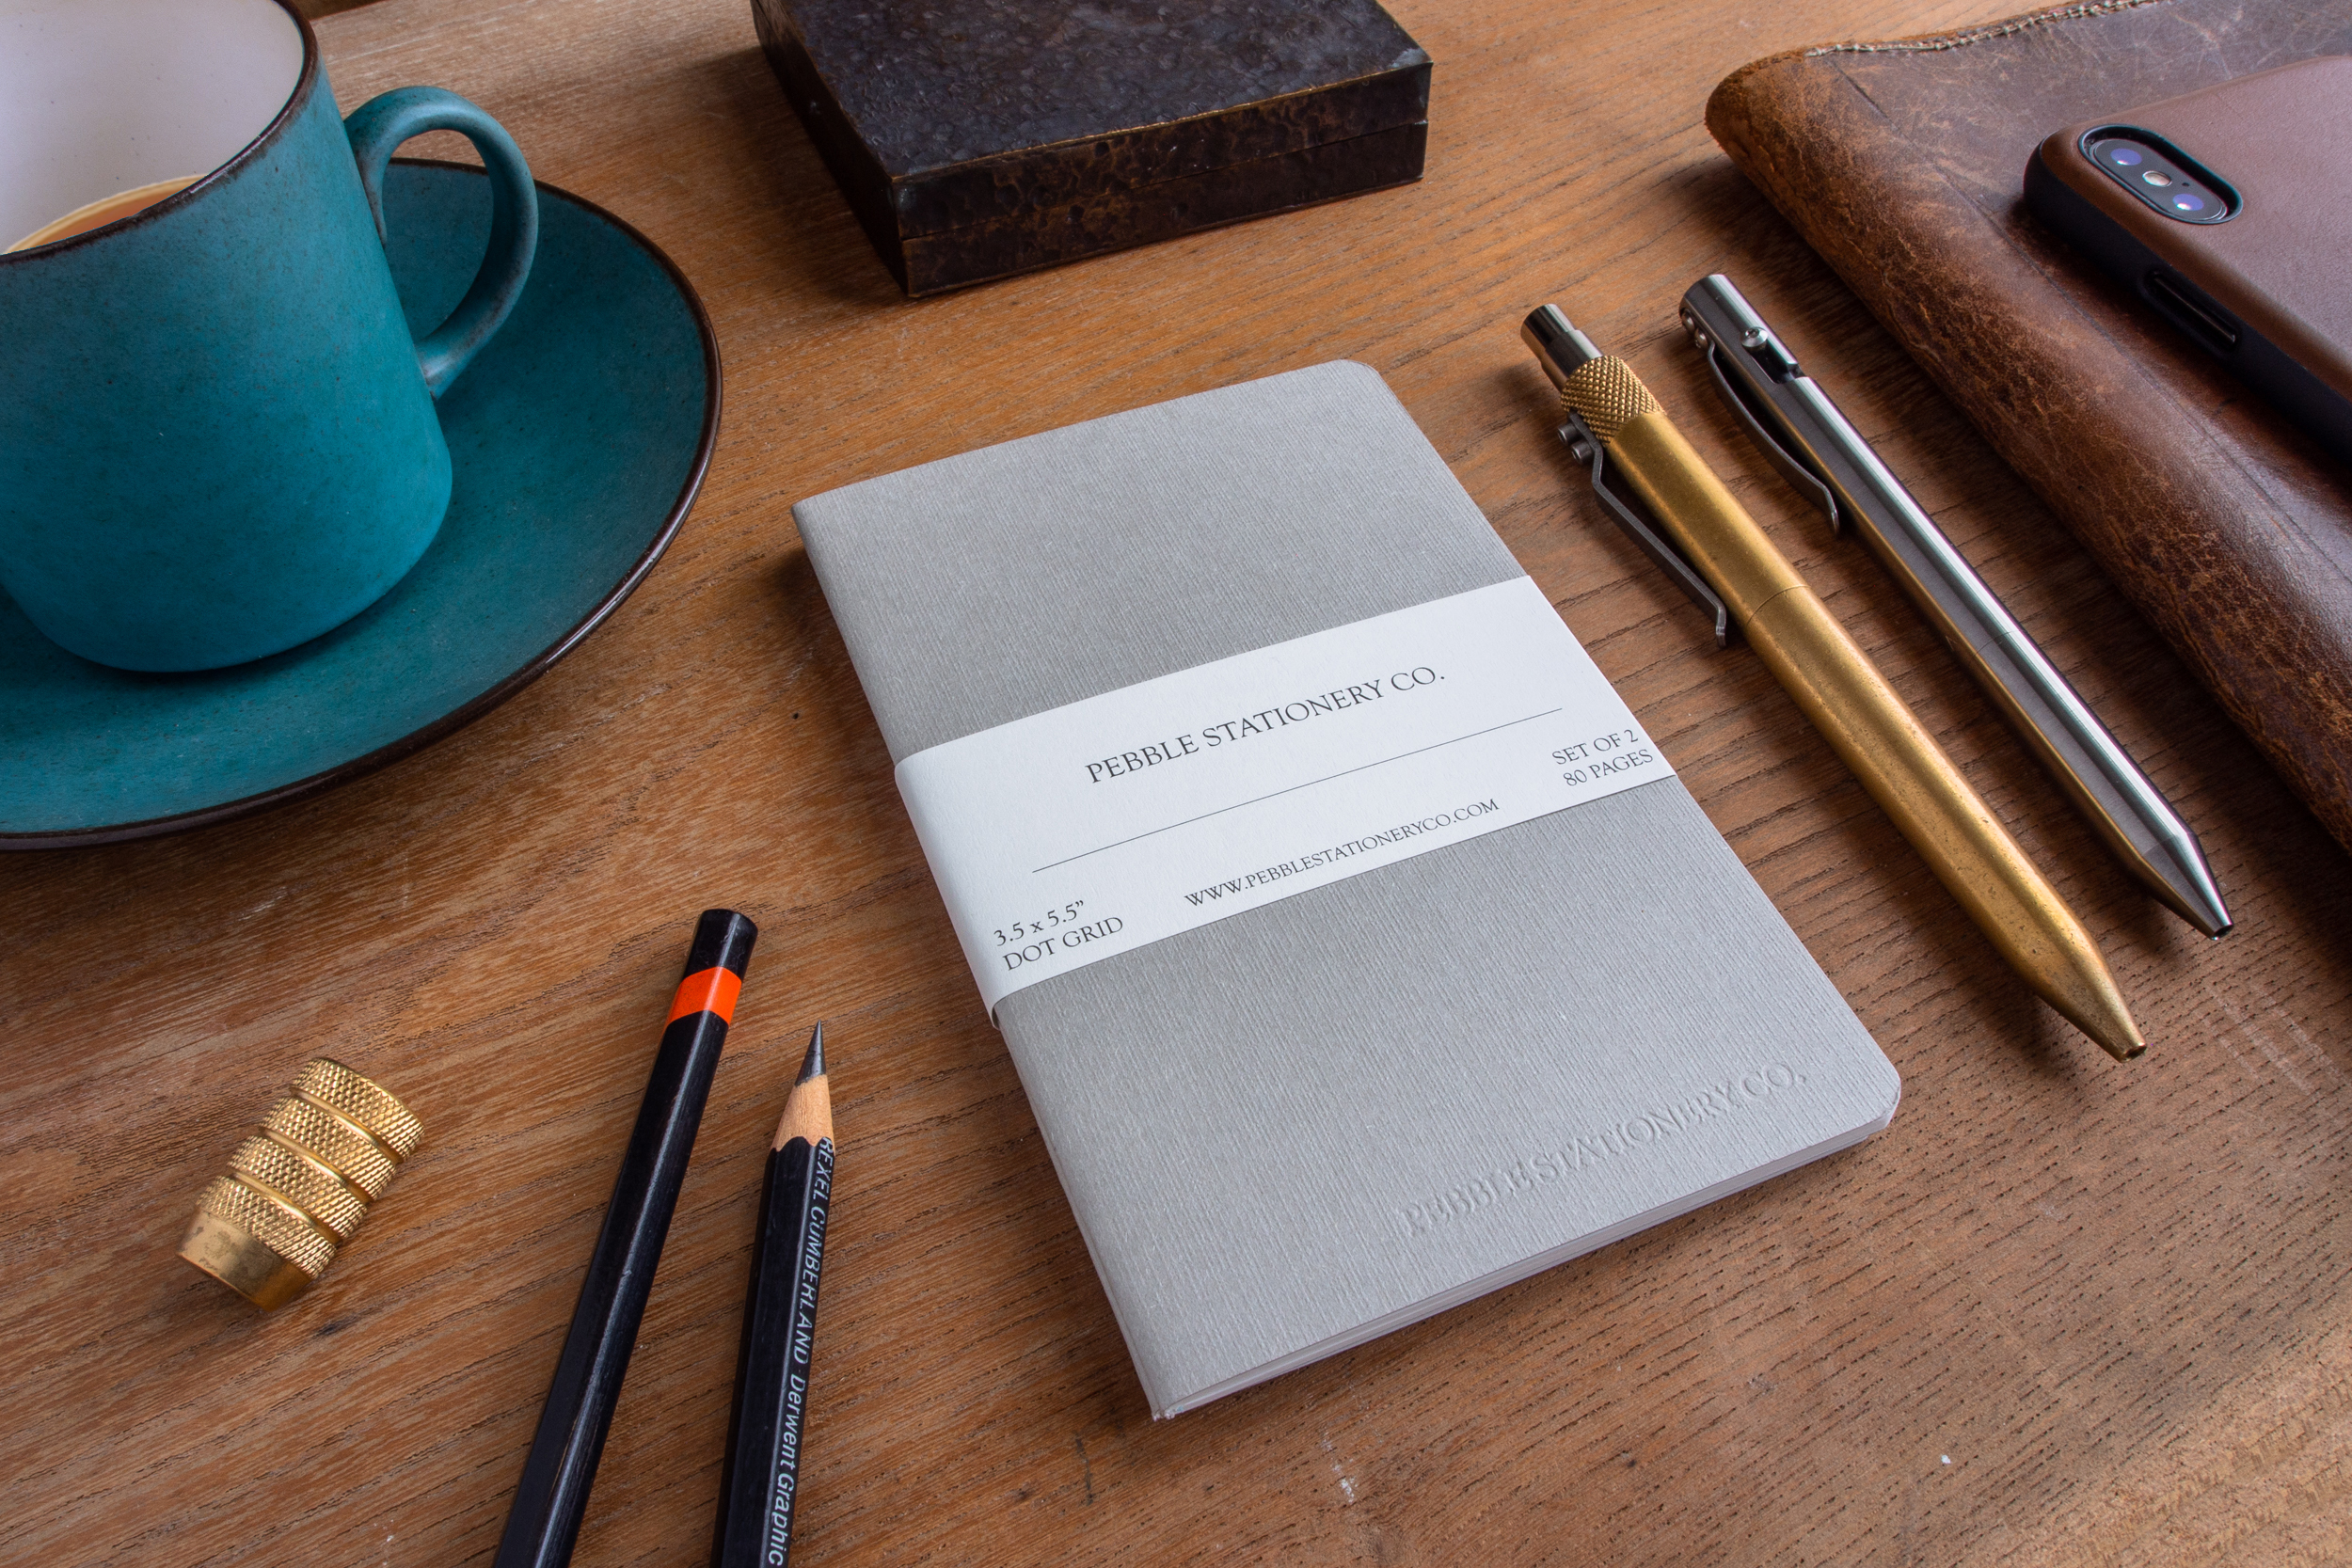 Pebble Stationery Co. Pocket Tomoe River Notebook Review